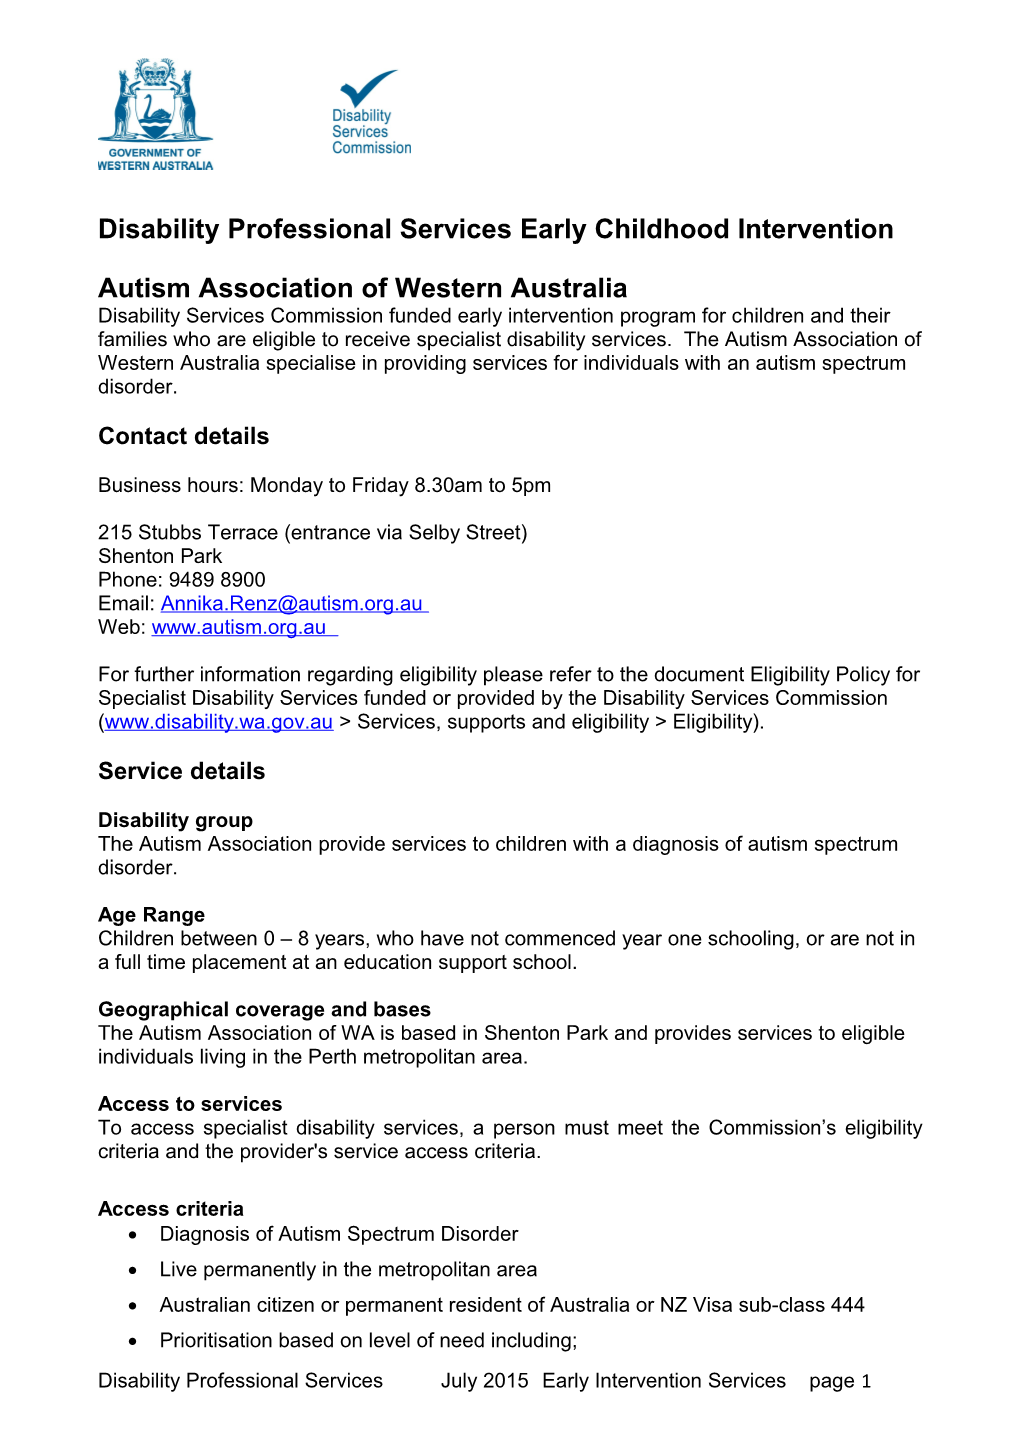 Service Provider Profiles - Early Childhood Intervention